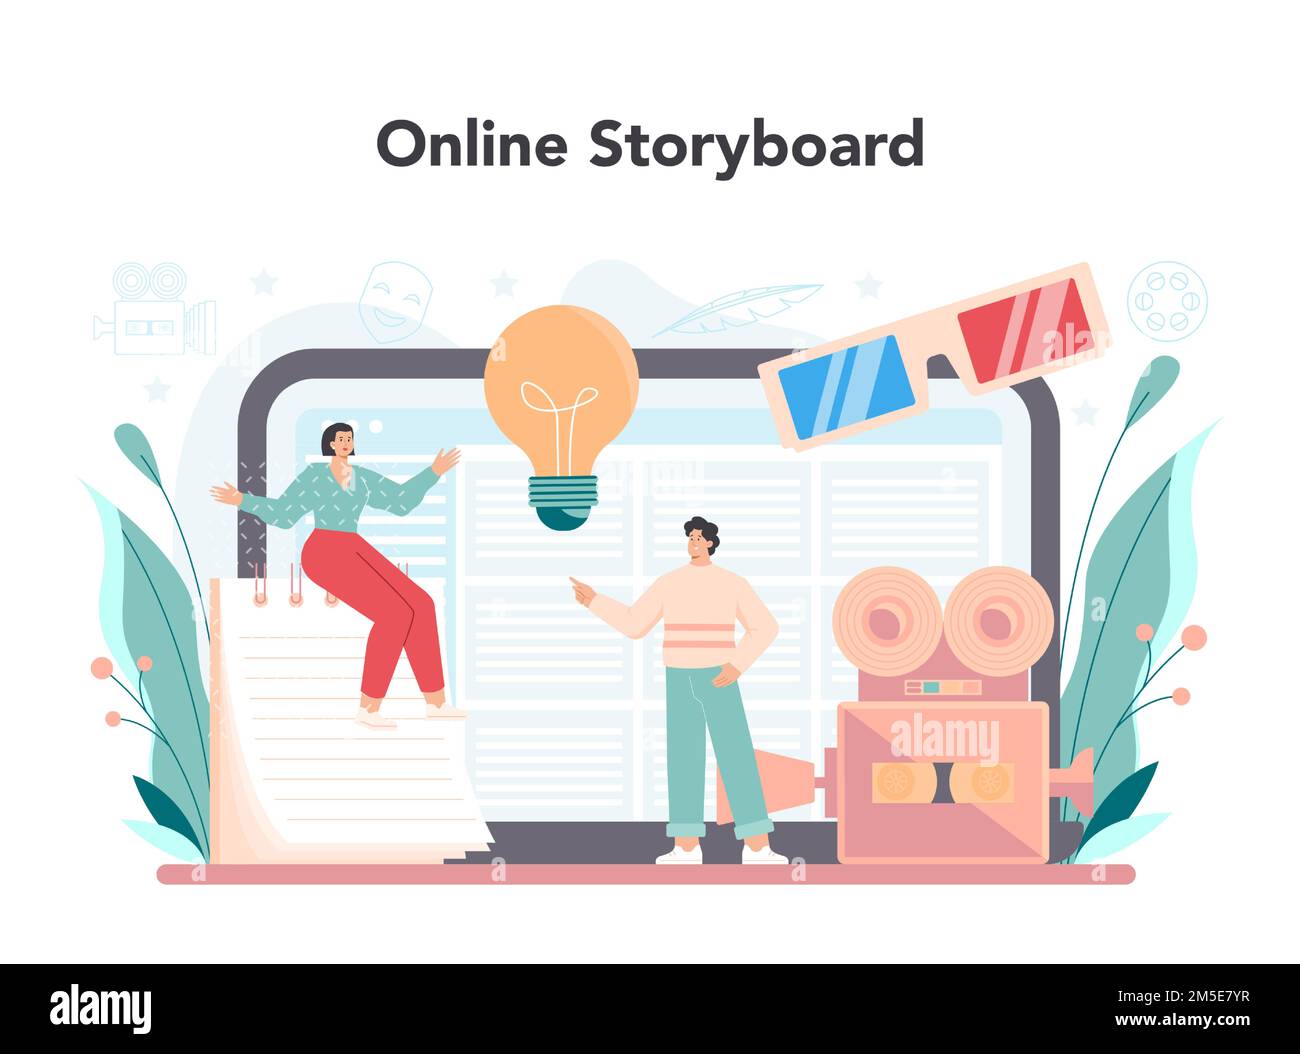 Screenwriter online service or platform. Playwright create a screenplay for movie. Online storyboard. Isolated vector illustration Stock Vector